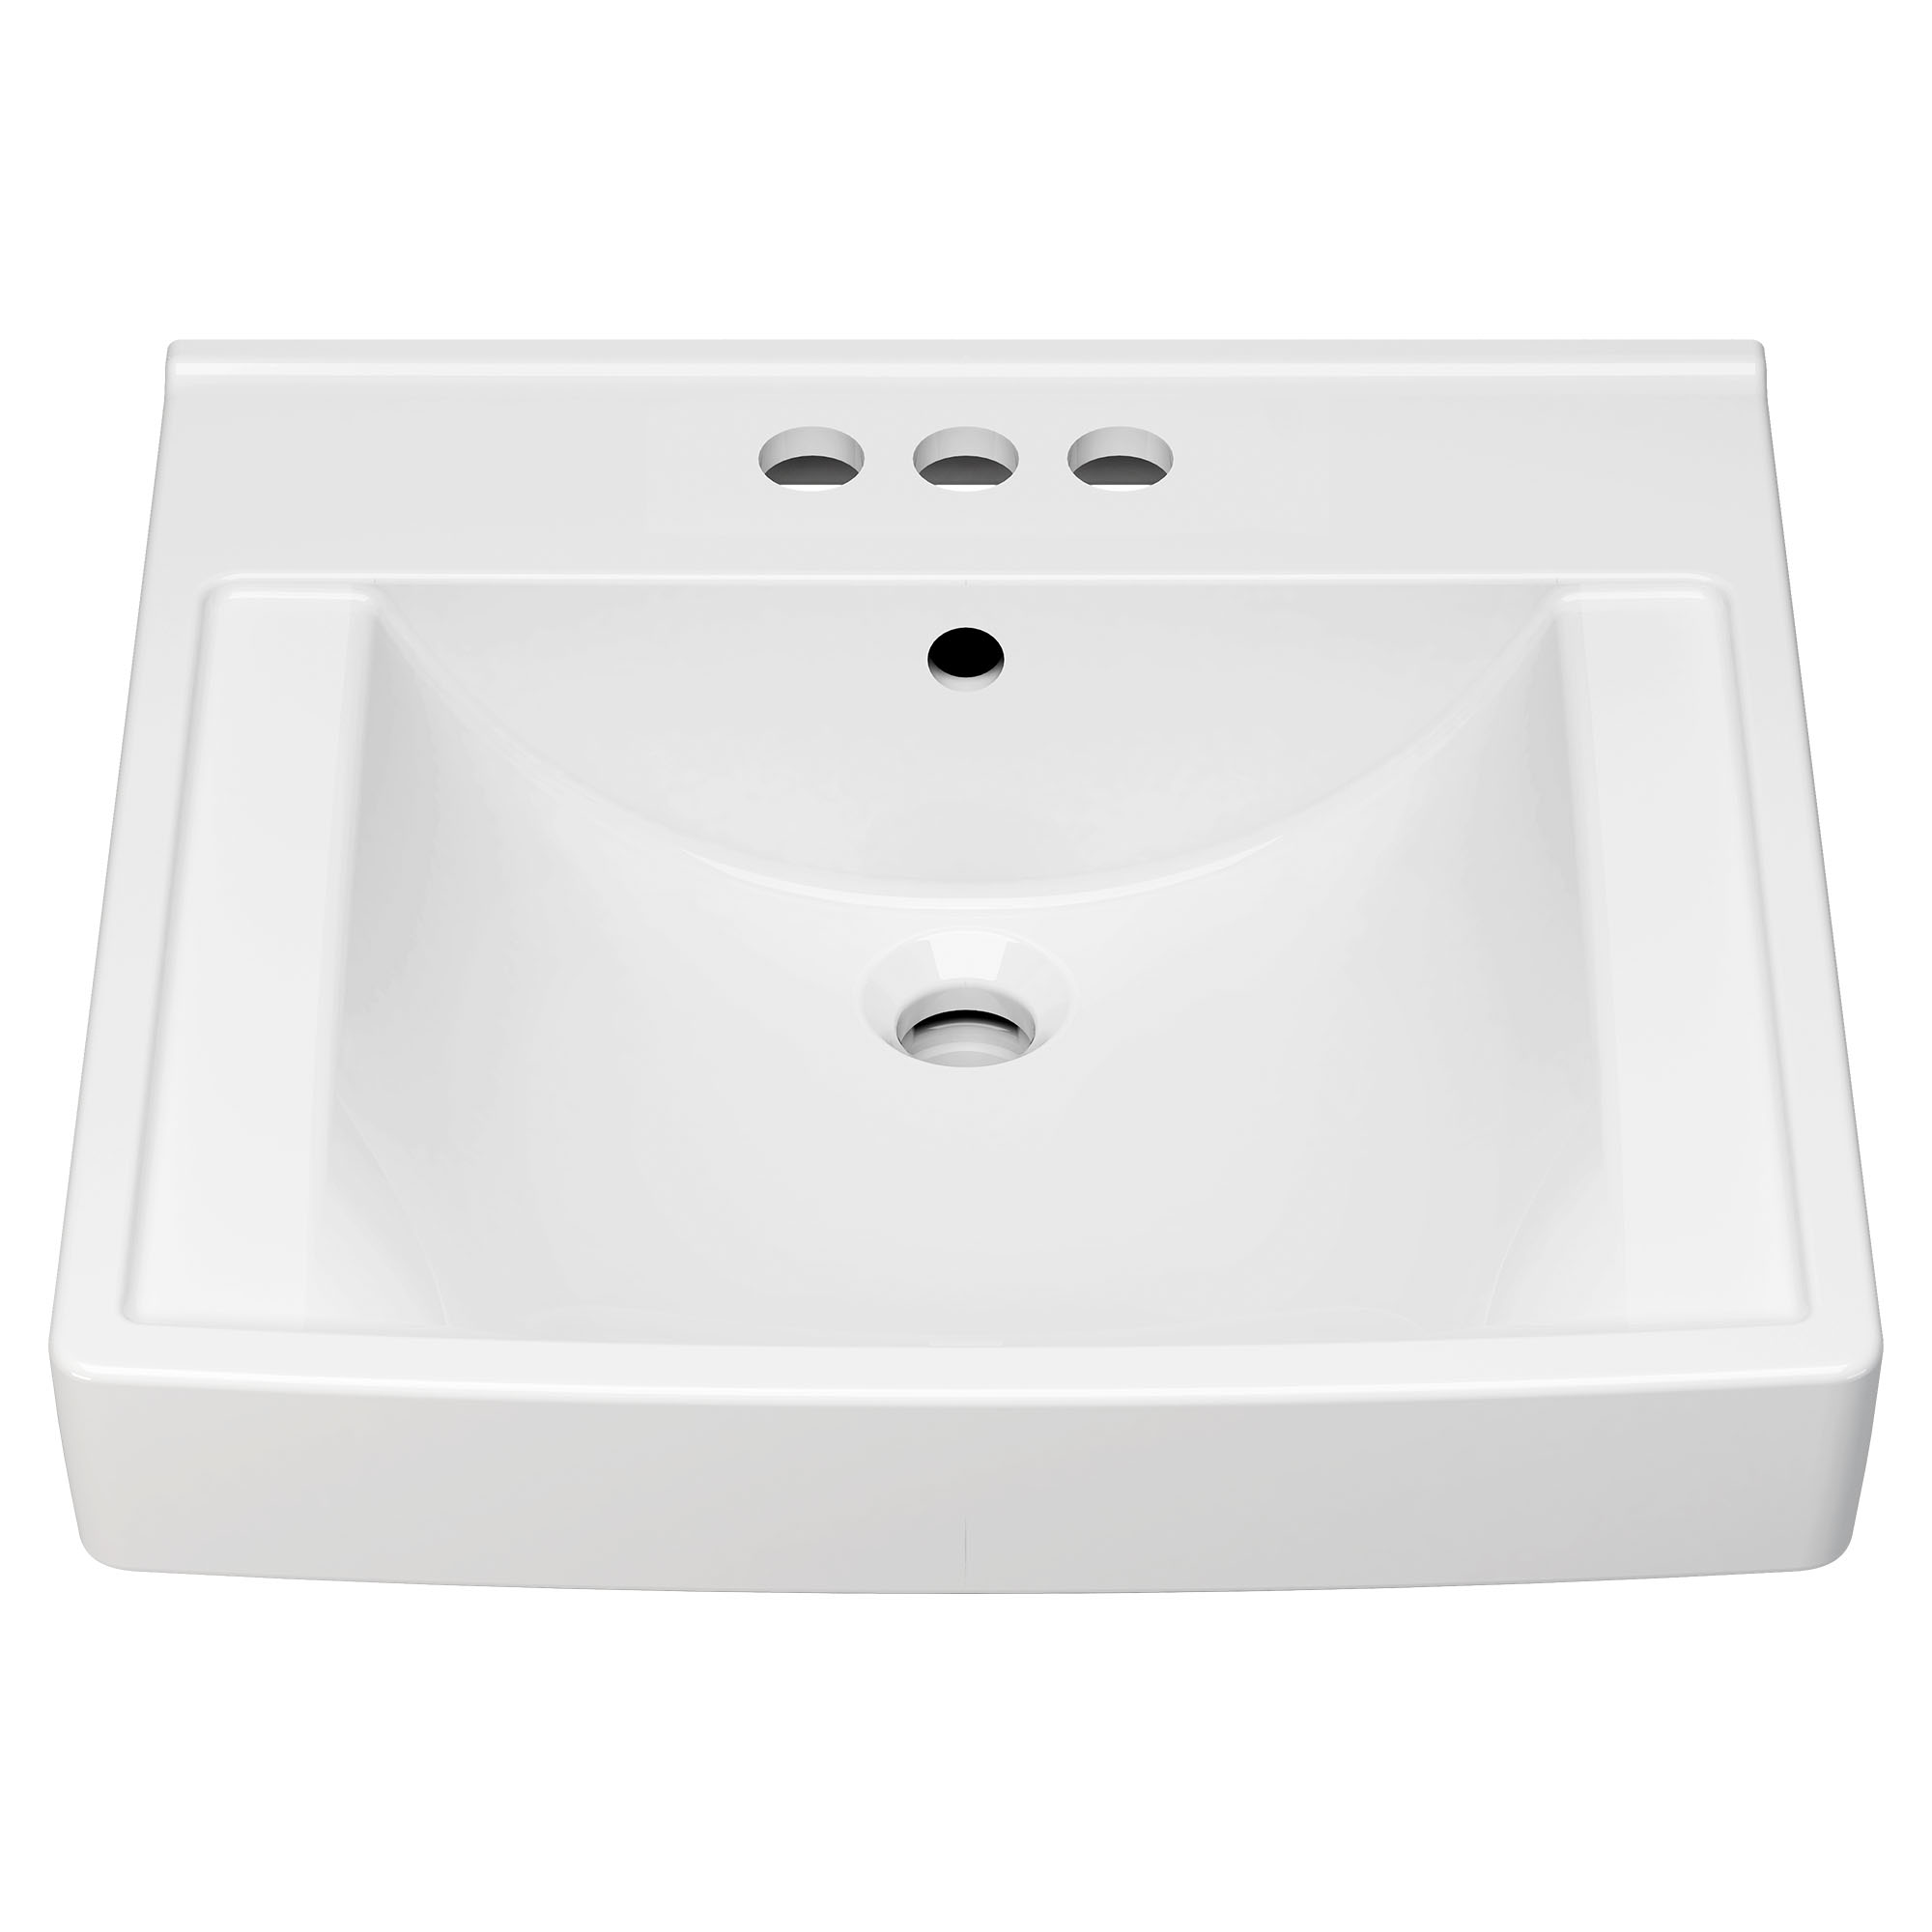 Decorum® 21 x 20-1/4-Inch (533 x 514 mm) Wall-Hung EverClean® Sink With 4-Inch Centerset